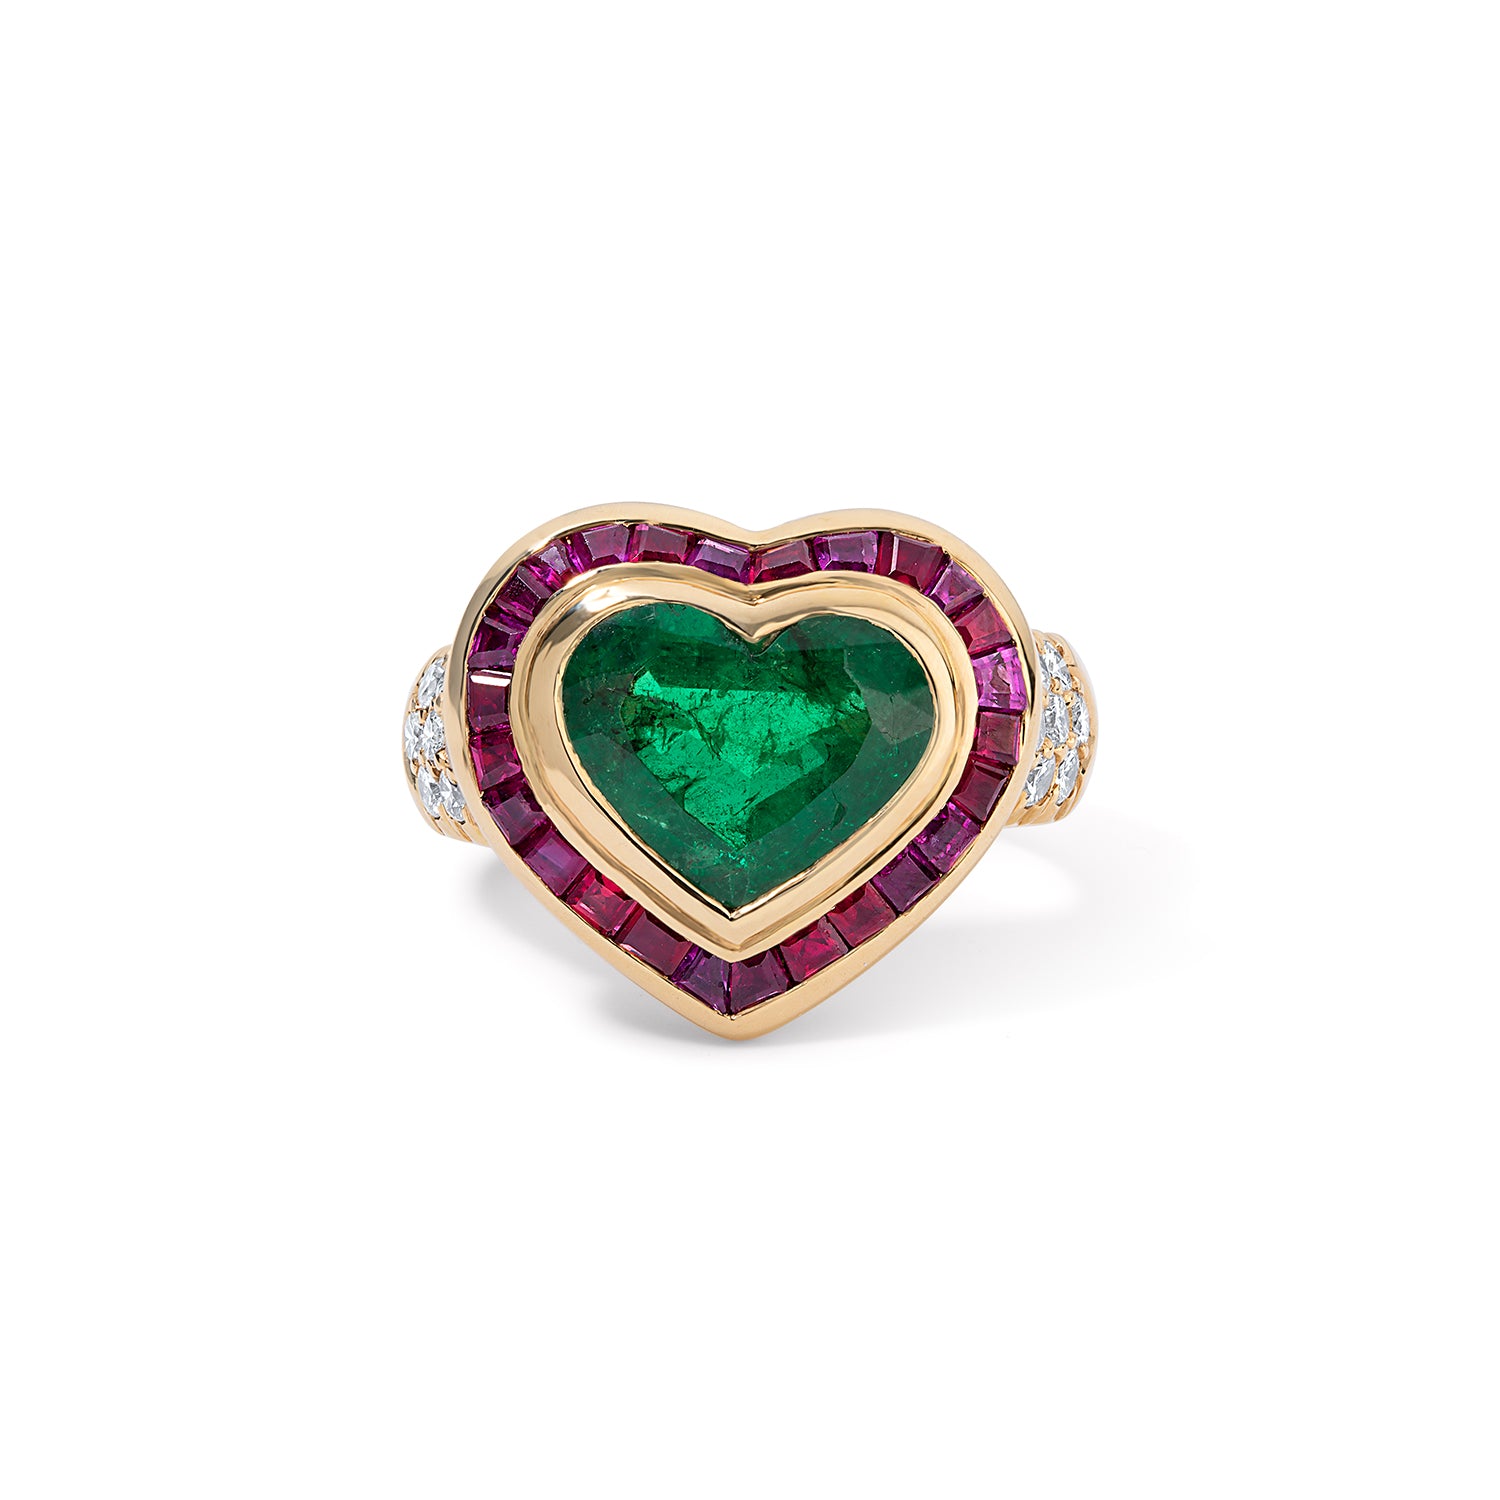 Vintage Heart Shaped Emerald with Ruby Baguettes and Diamond Ring